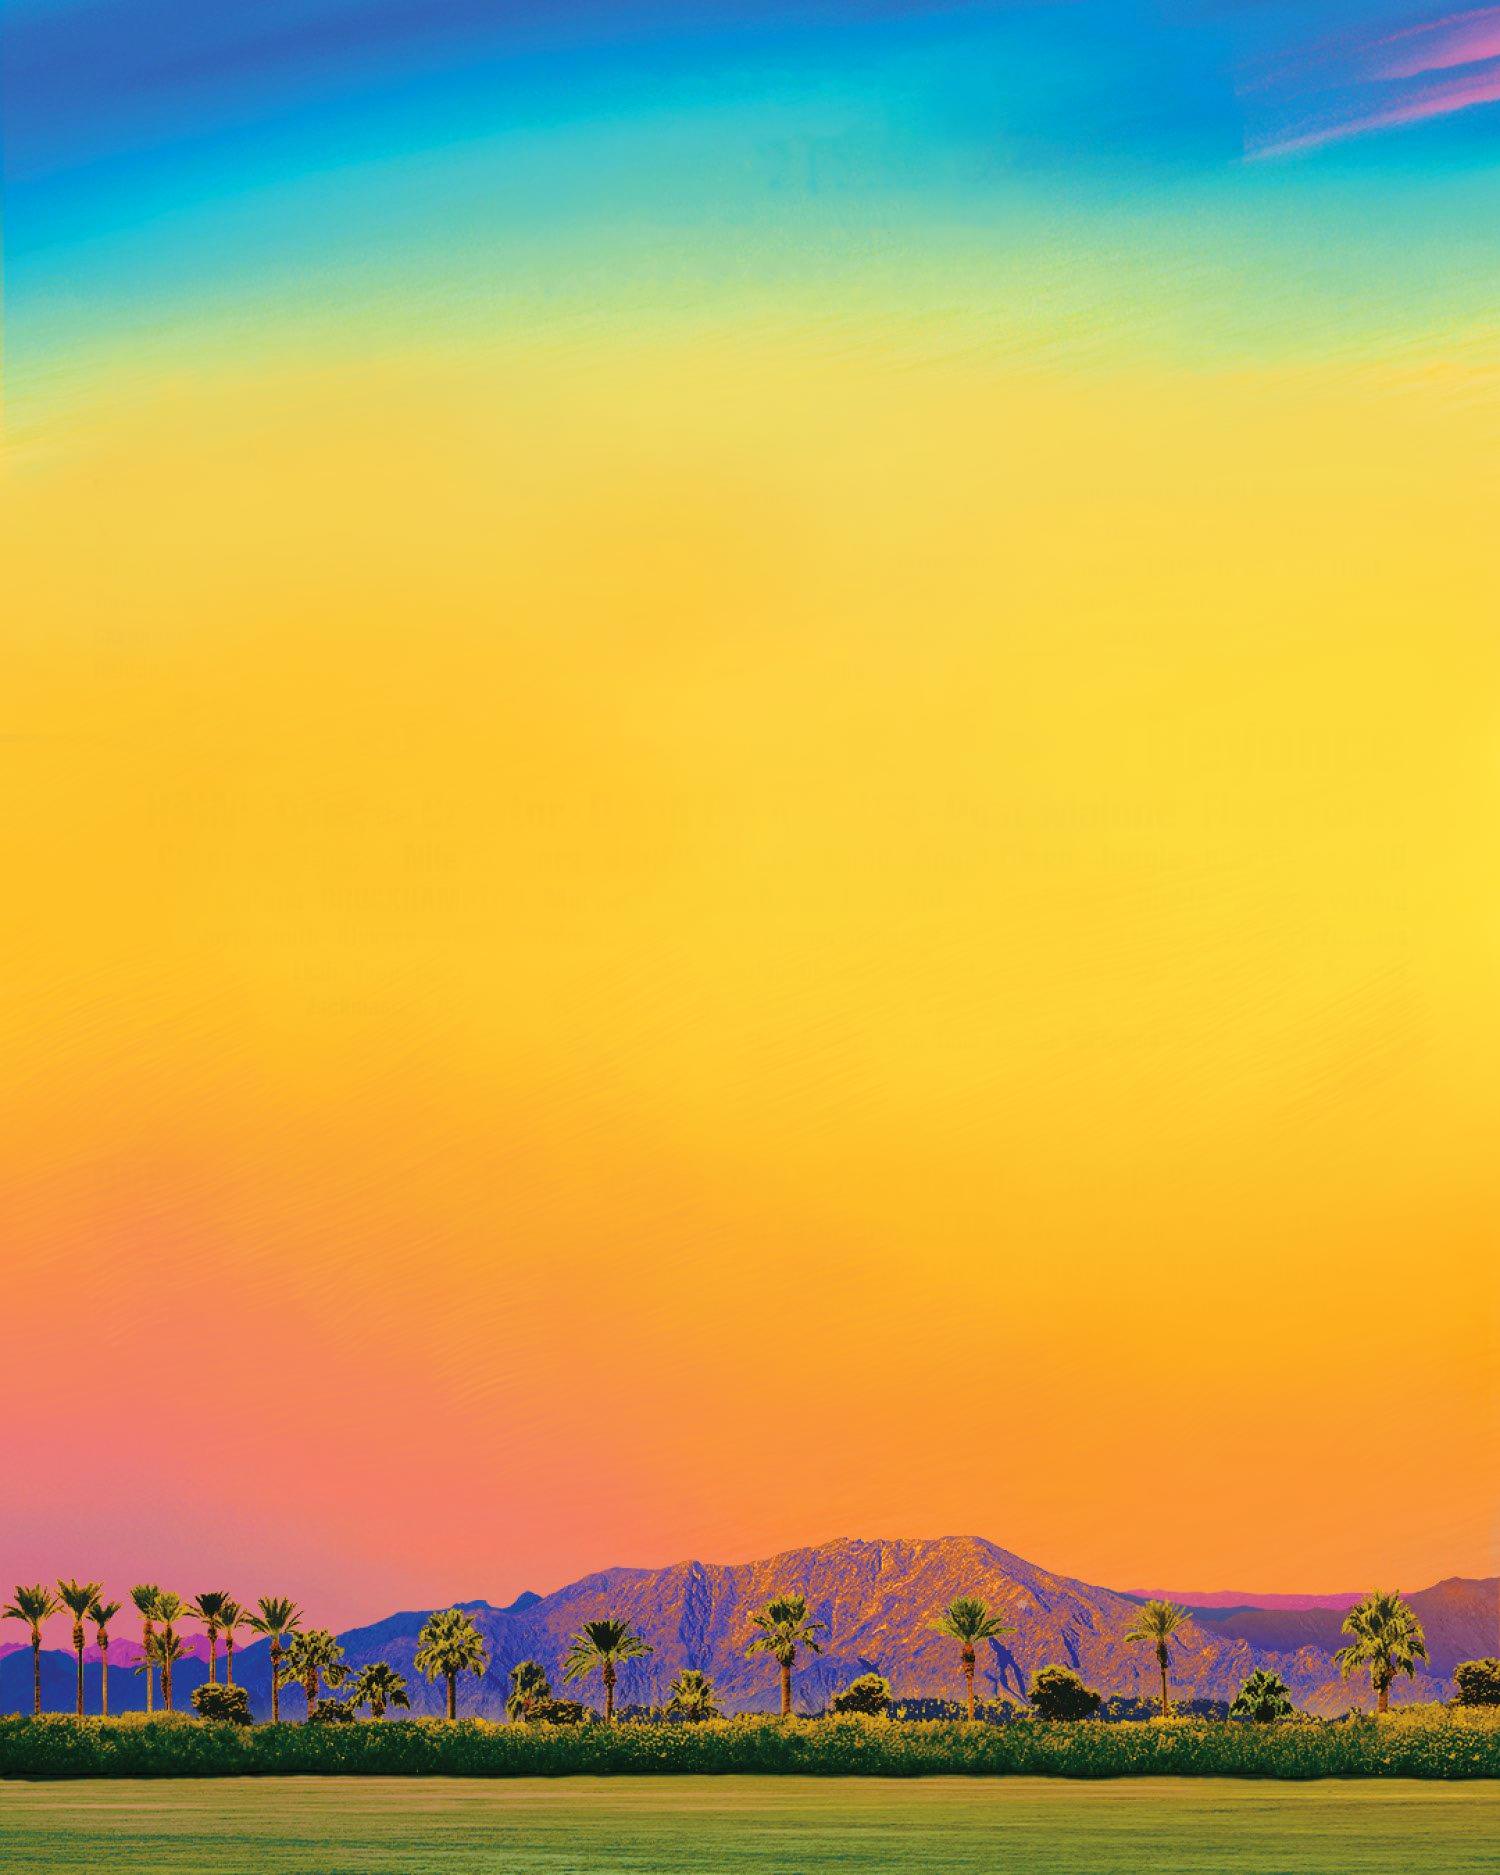 Desertscape wallpaper with no writing :)